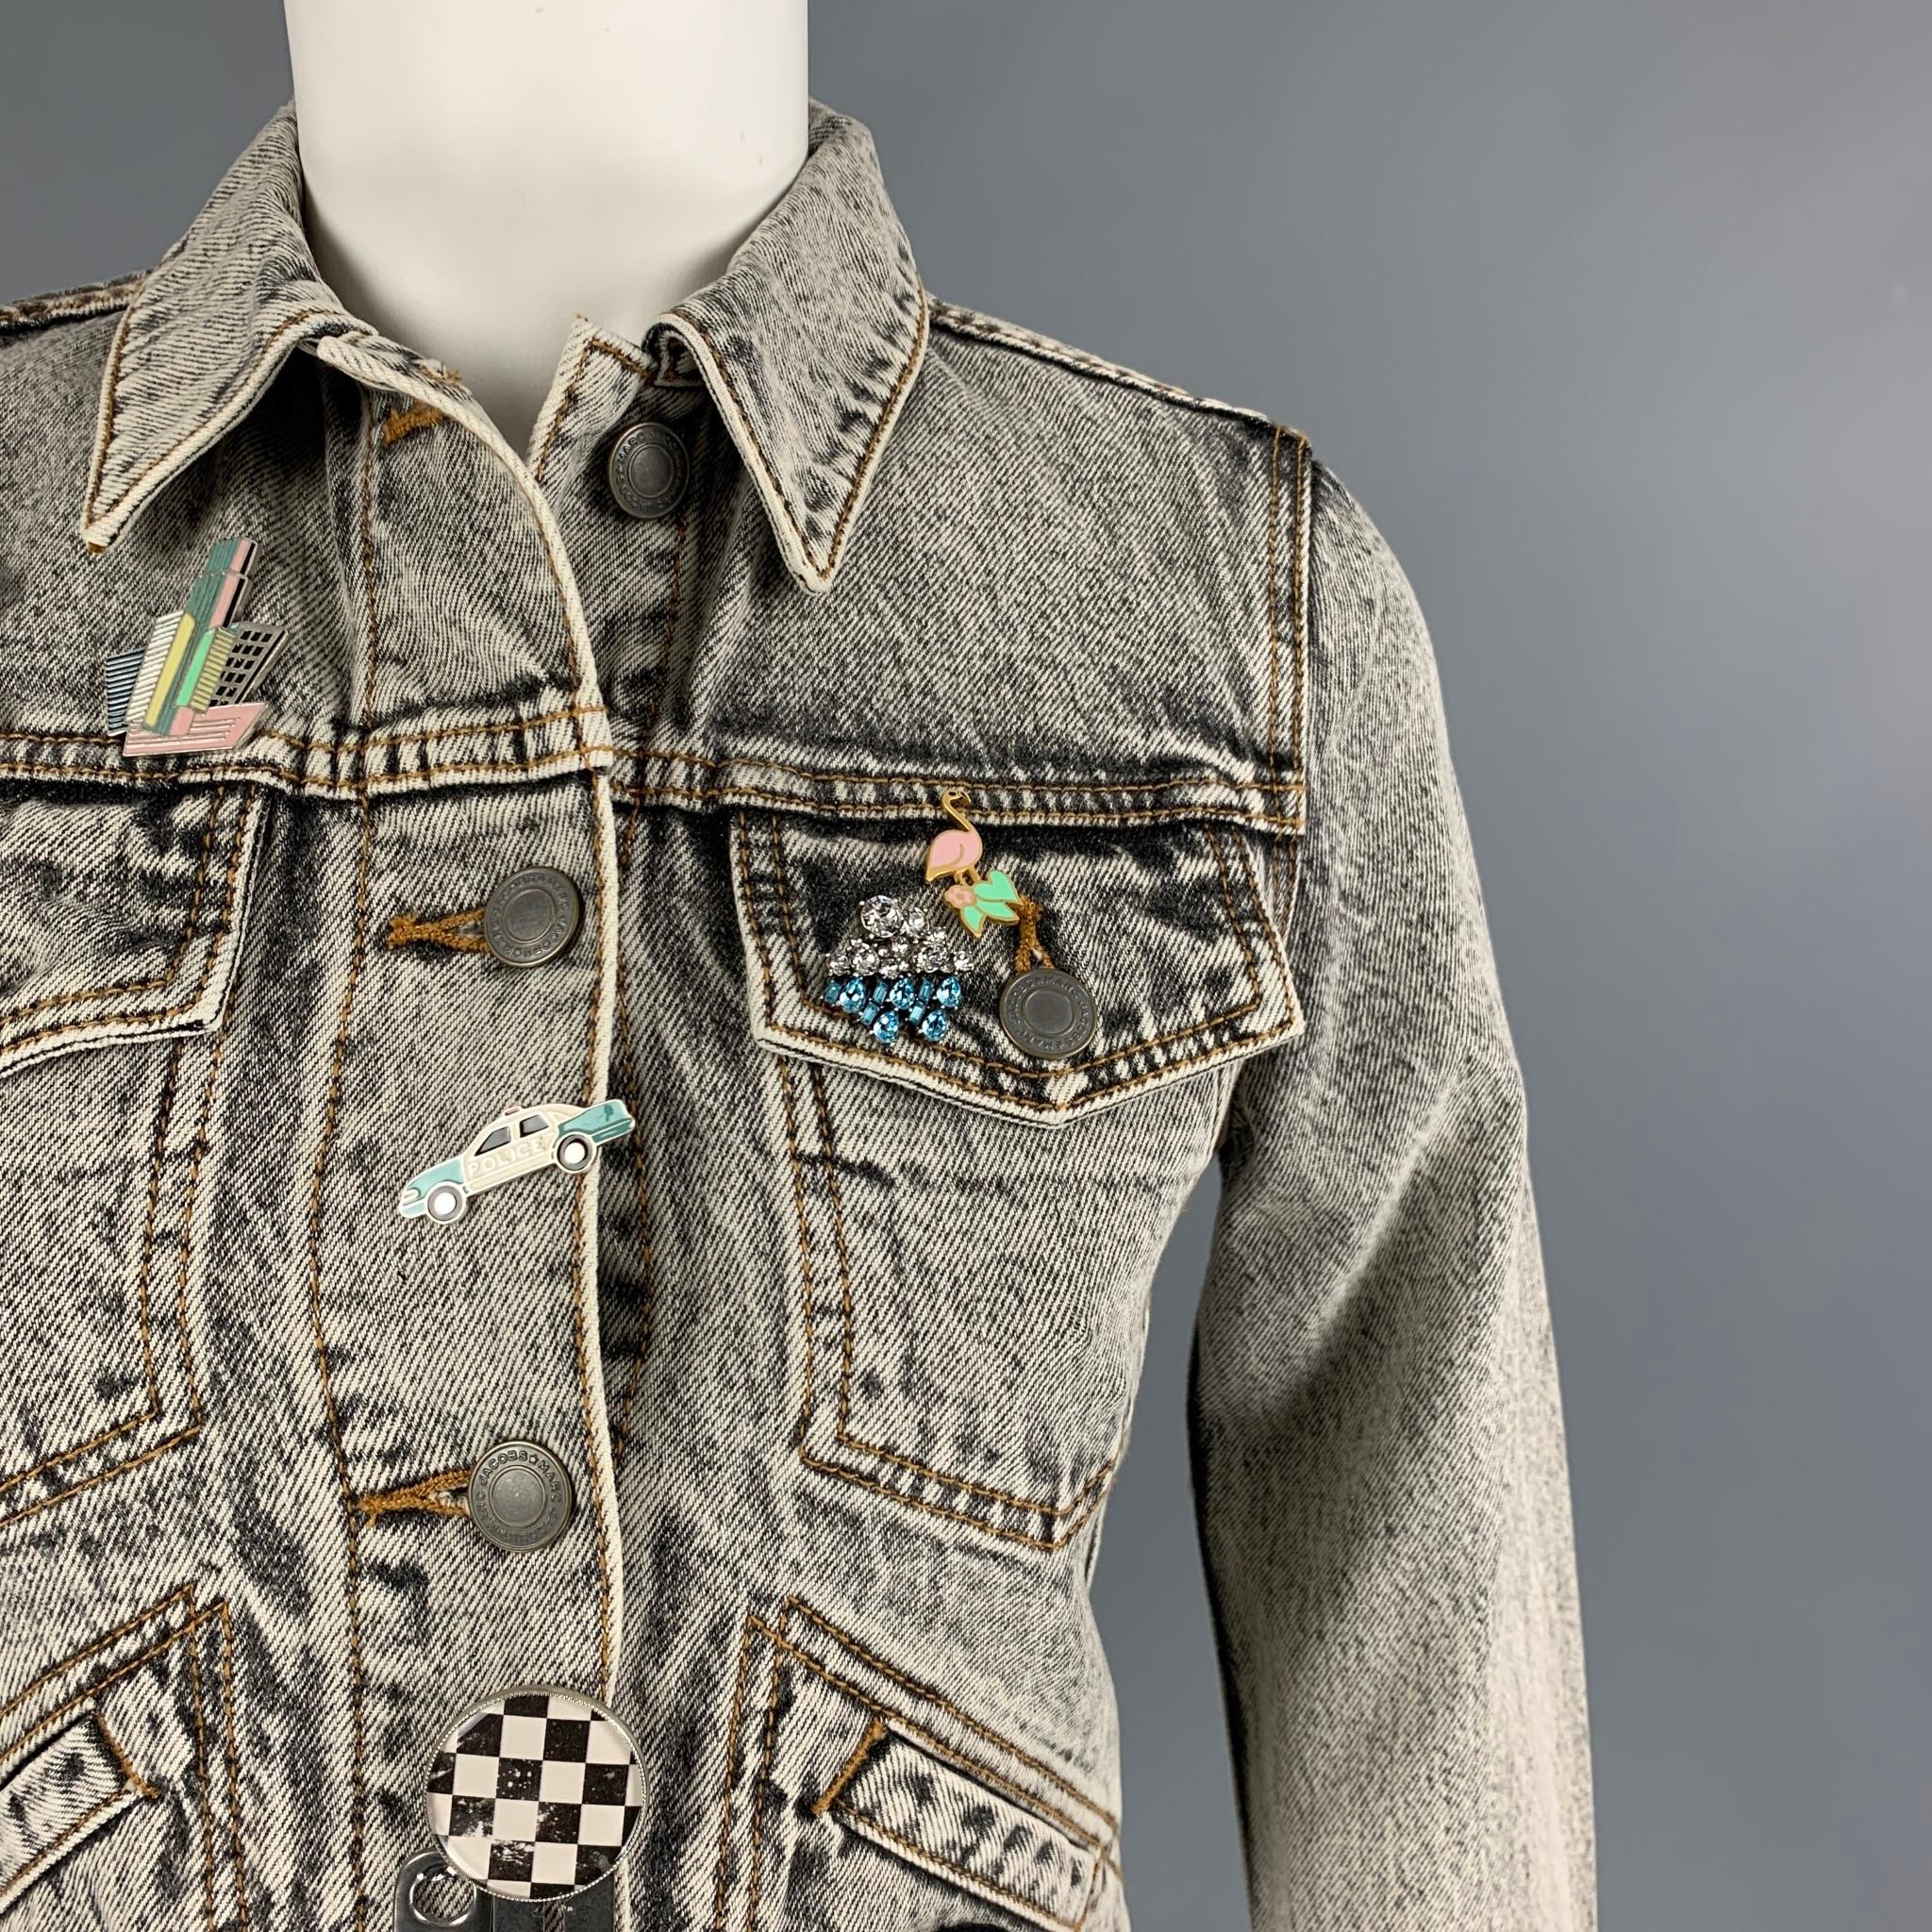 MARC JACOBS jacket comes in a black acid-wash denim featuring a cropped style, pin details, patches throughout, contrast stitching, front pockets, a back embroidered 'paradise' design, and a buttoned closure. 

New With Tags.
Marked: